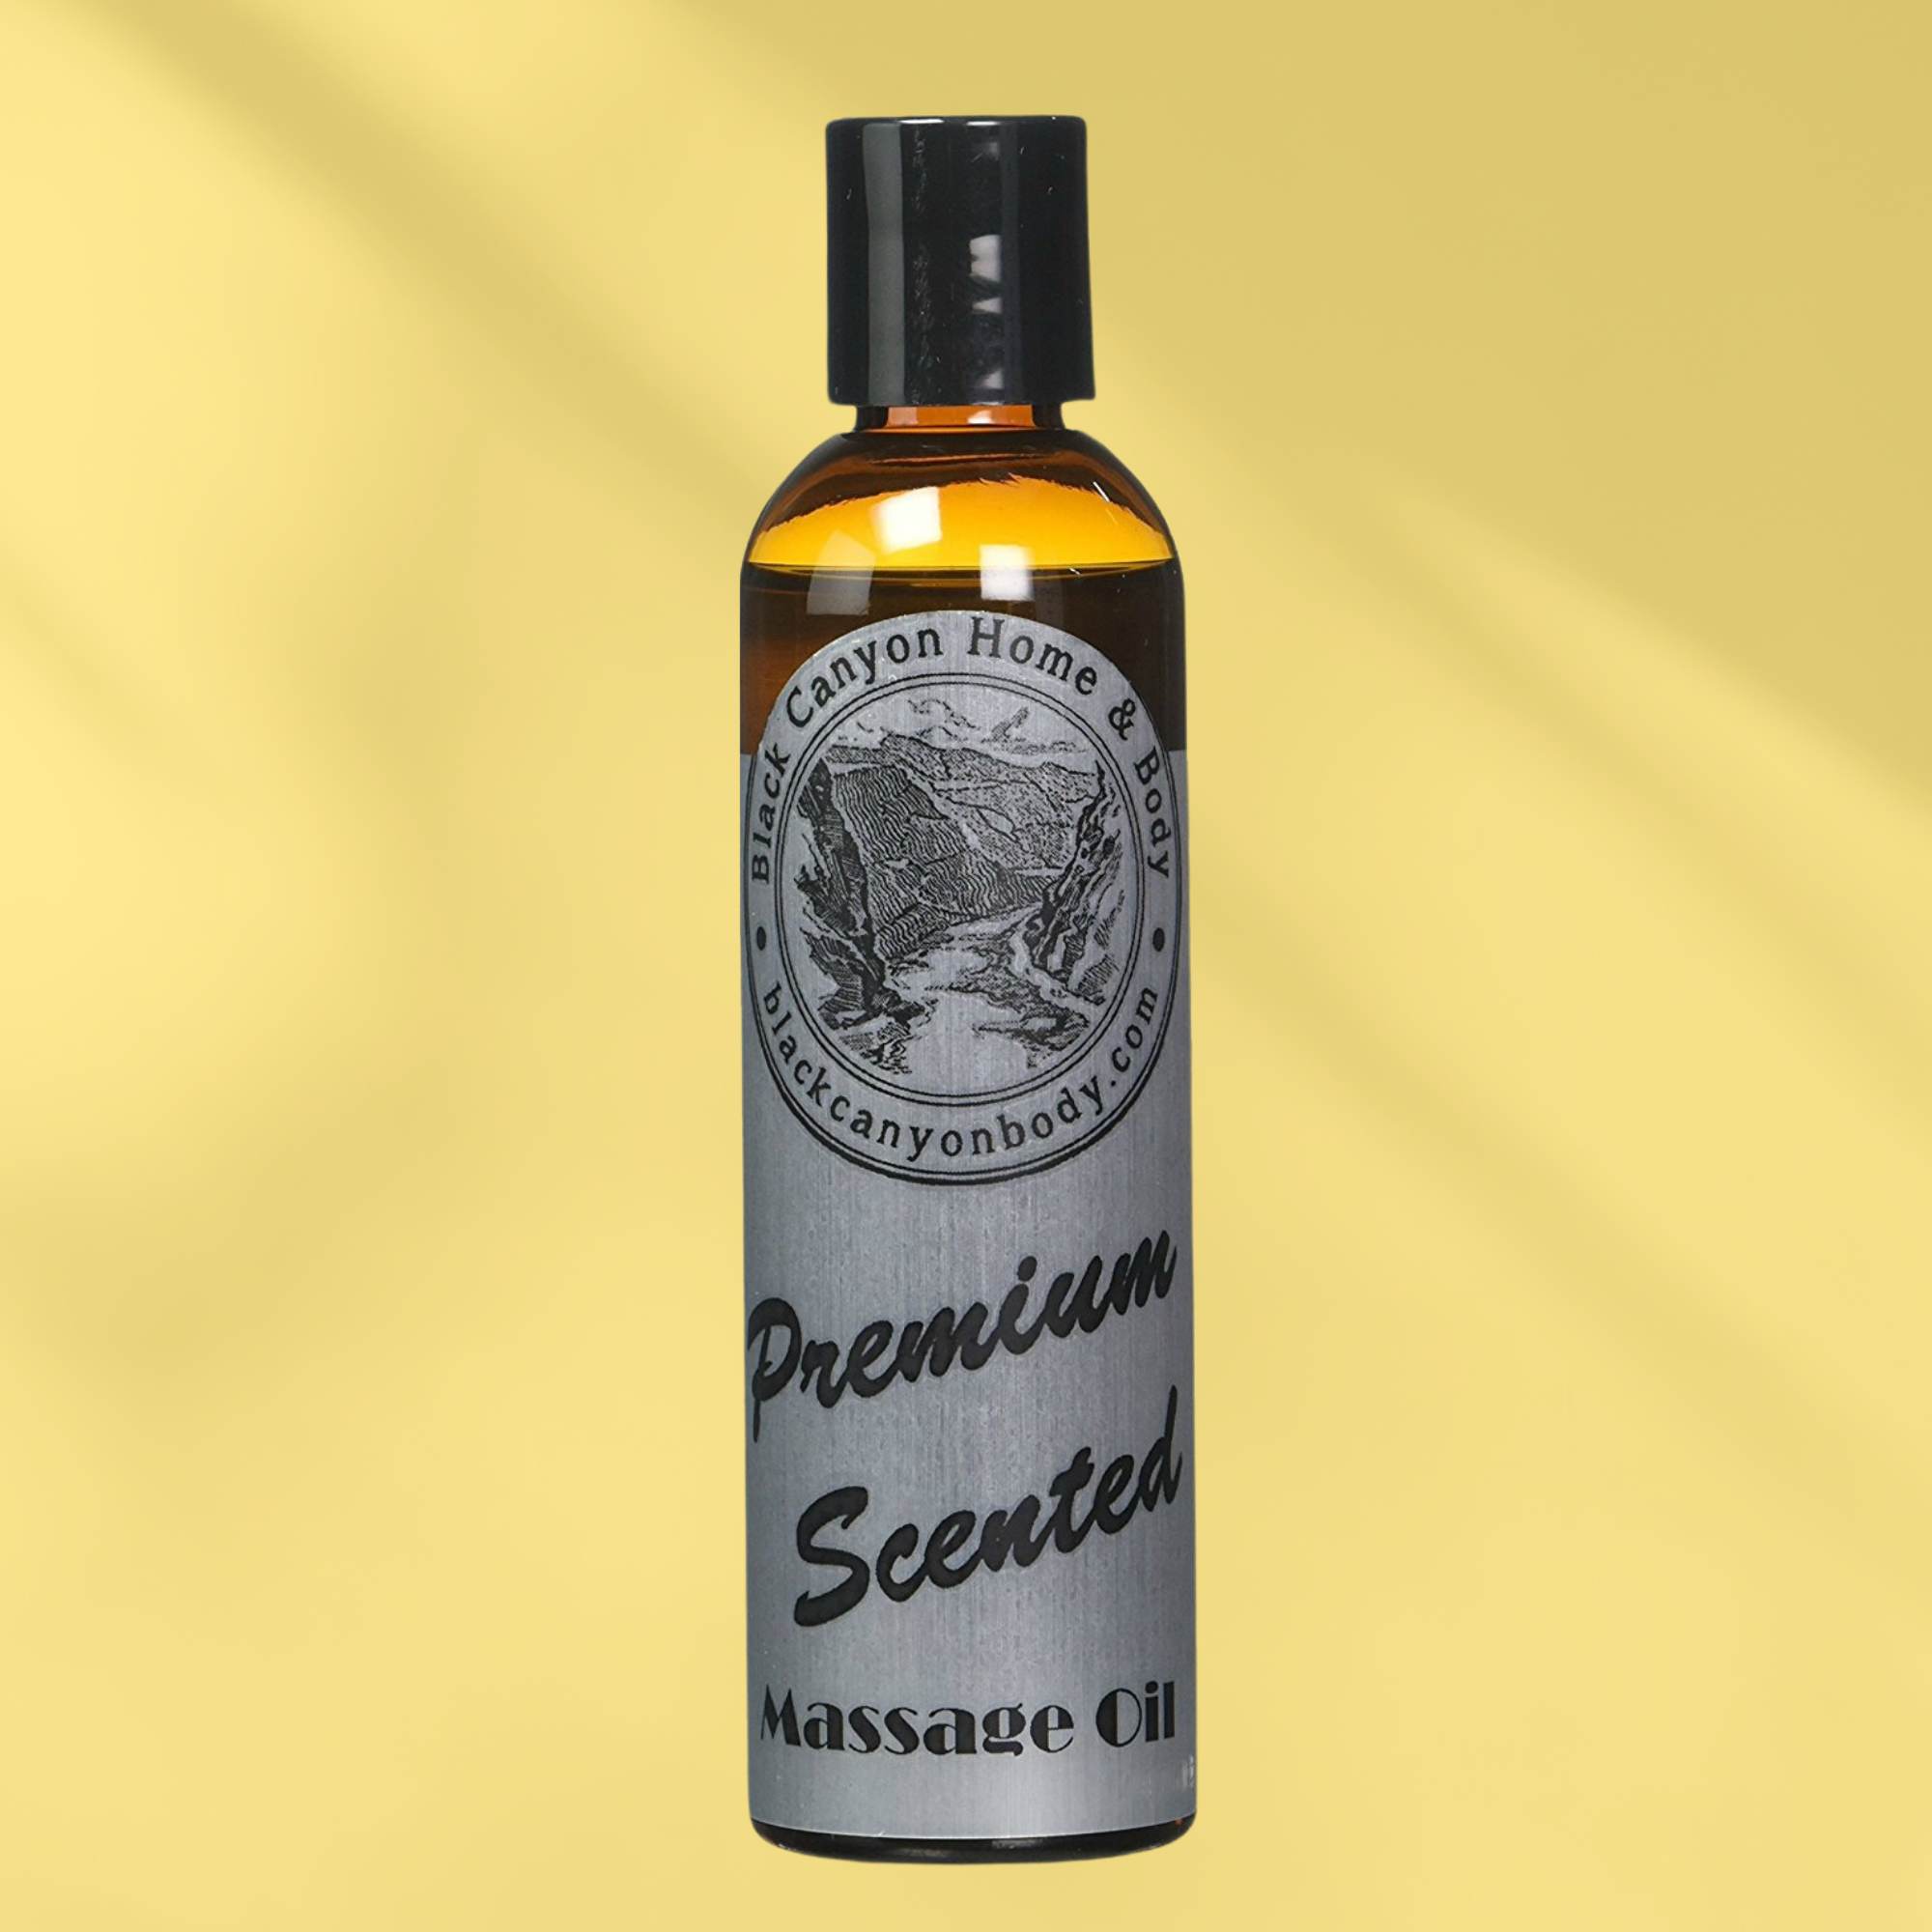 Black Canyon Blackberry Amber Scented Massage Oil